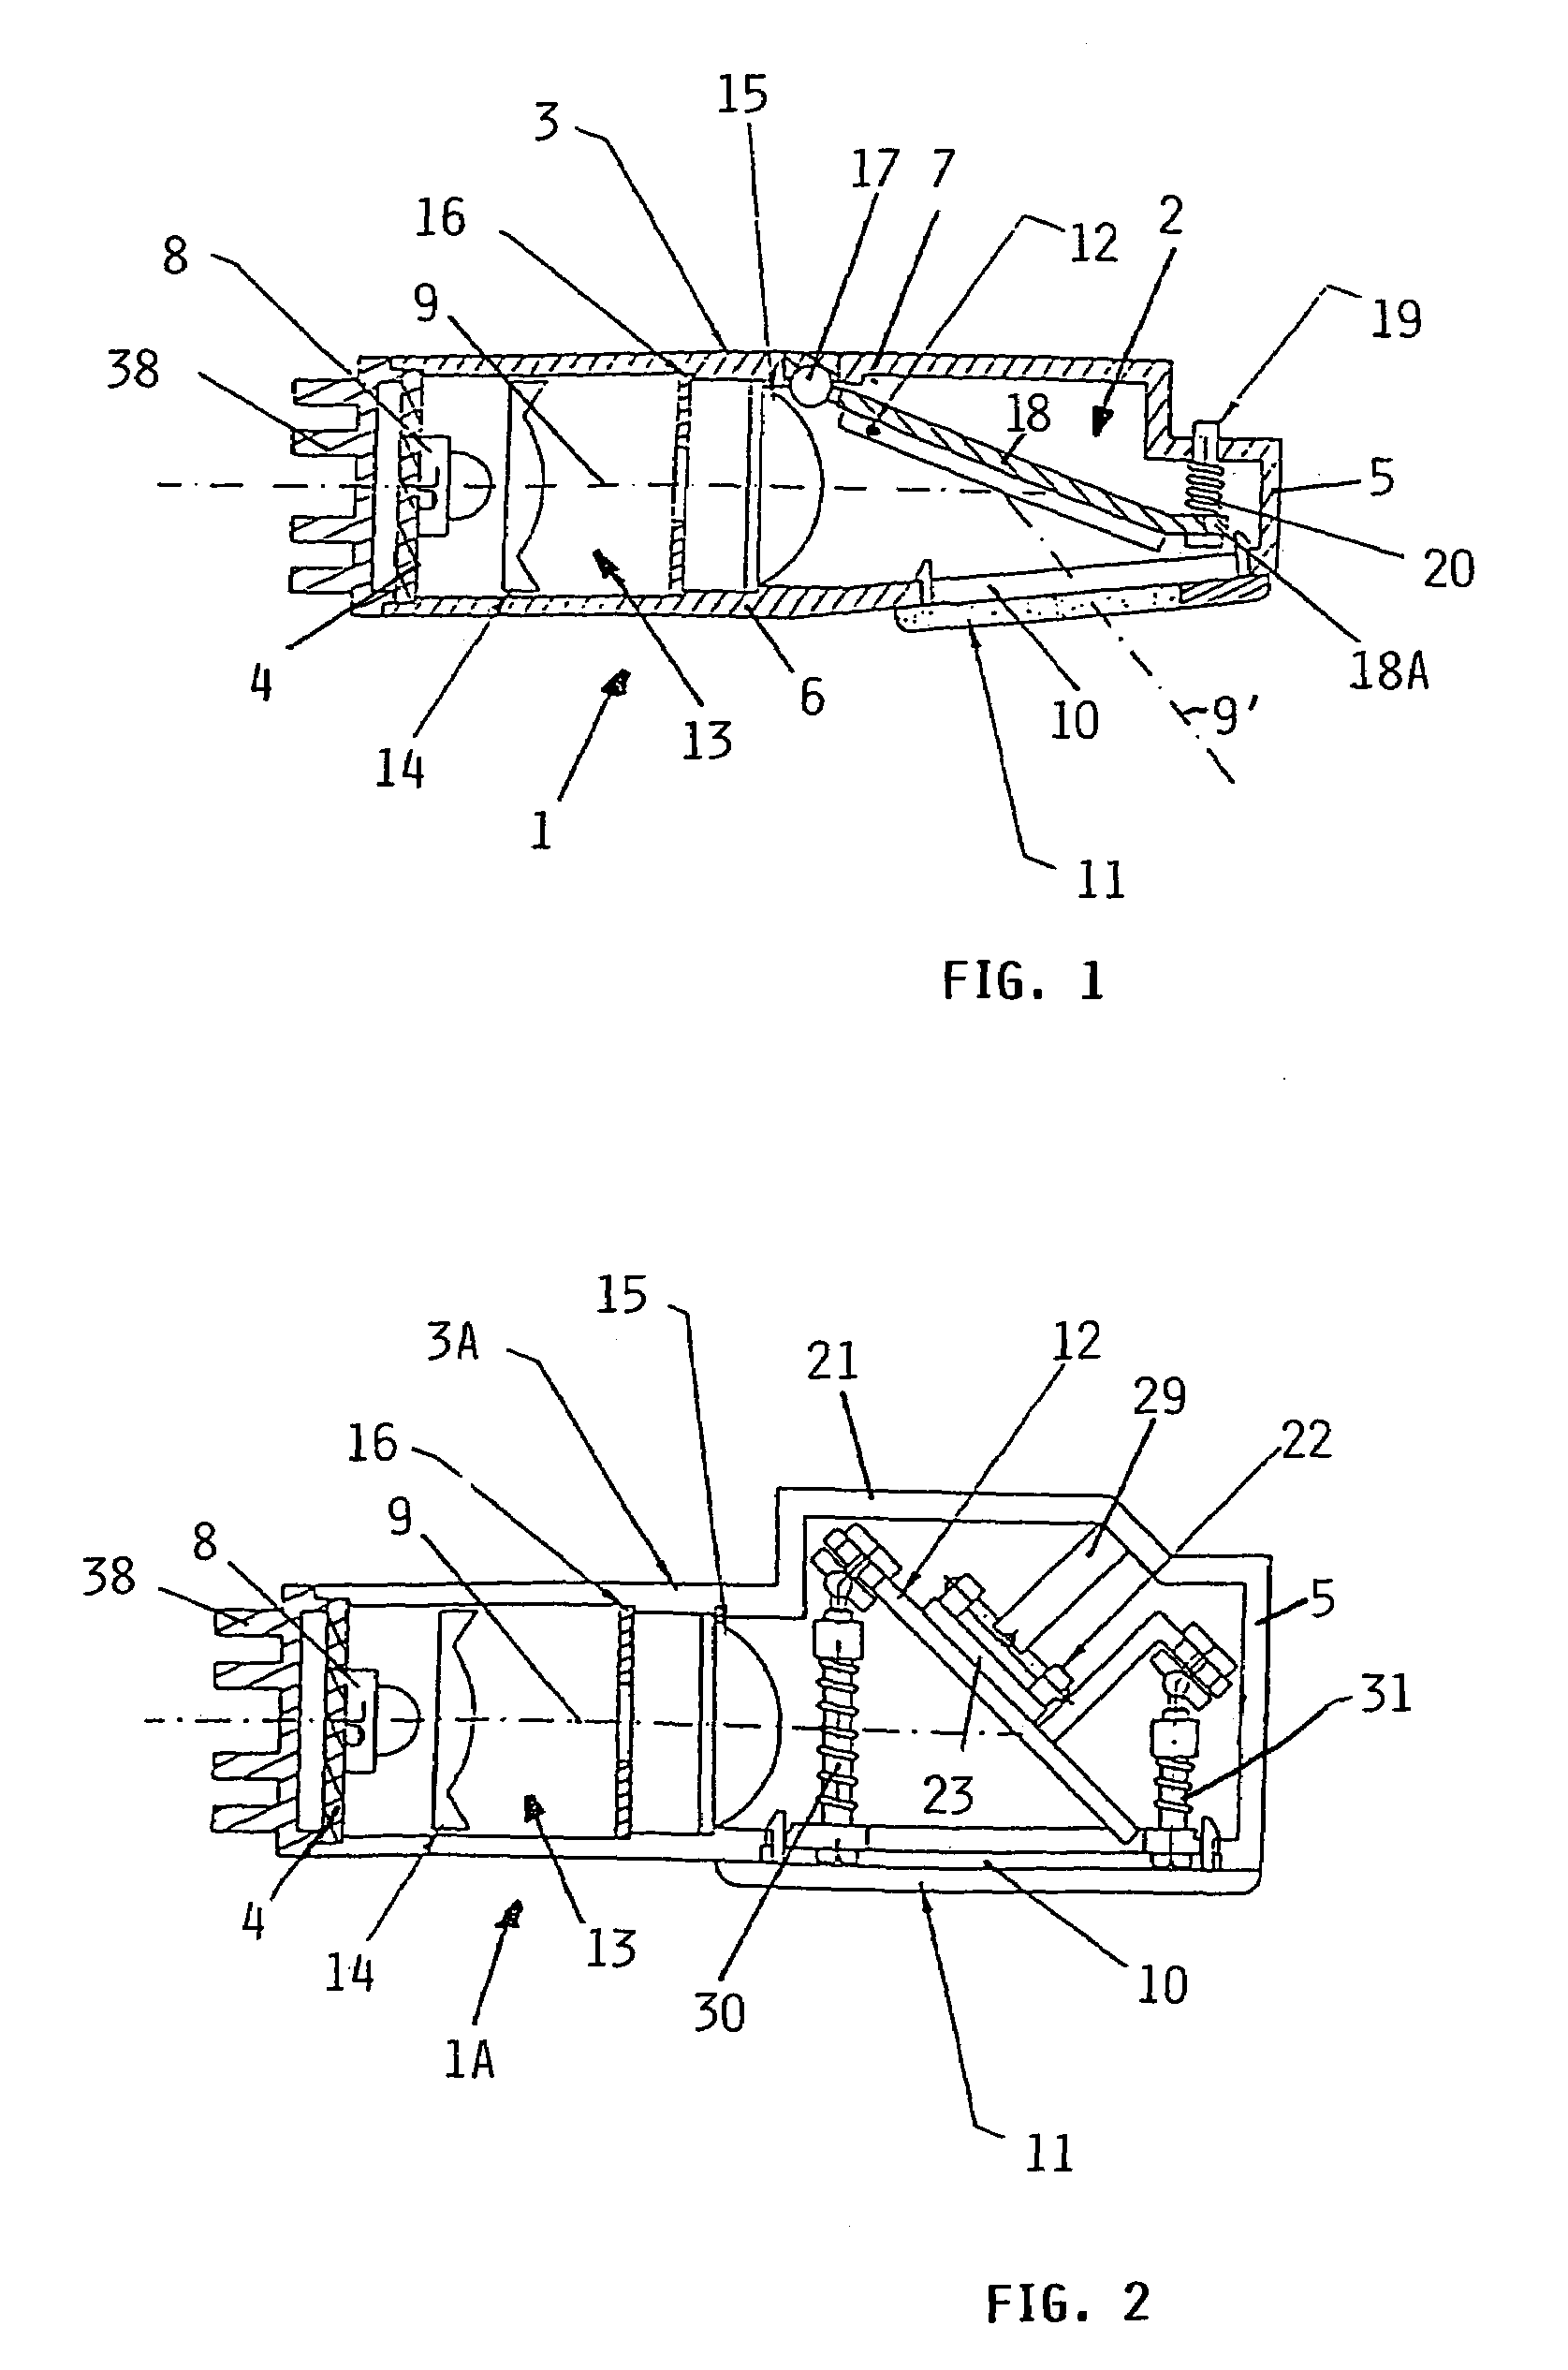 Reading lamp for aircraft cabins